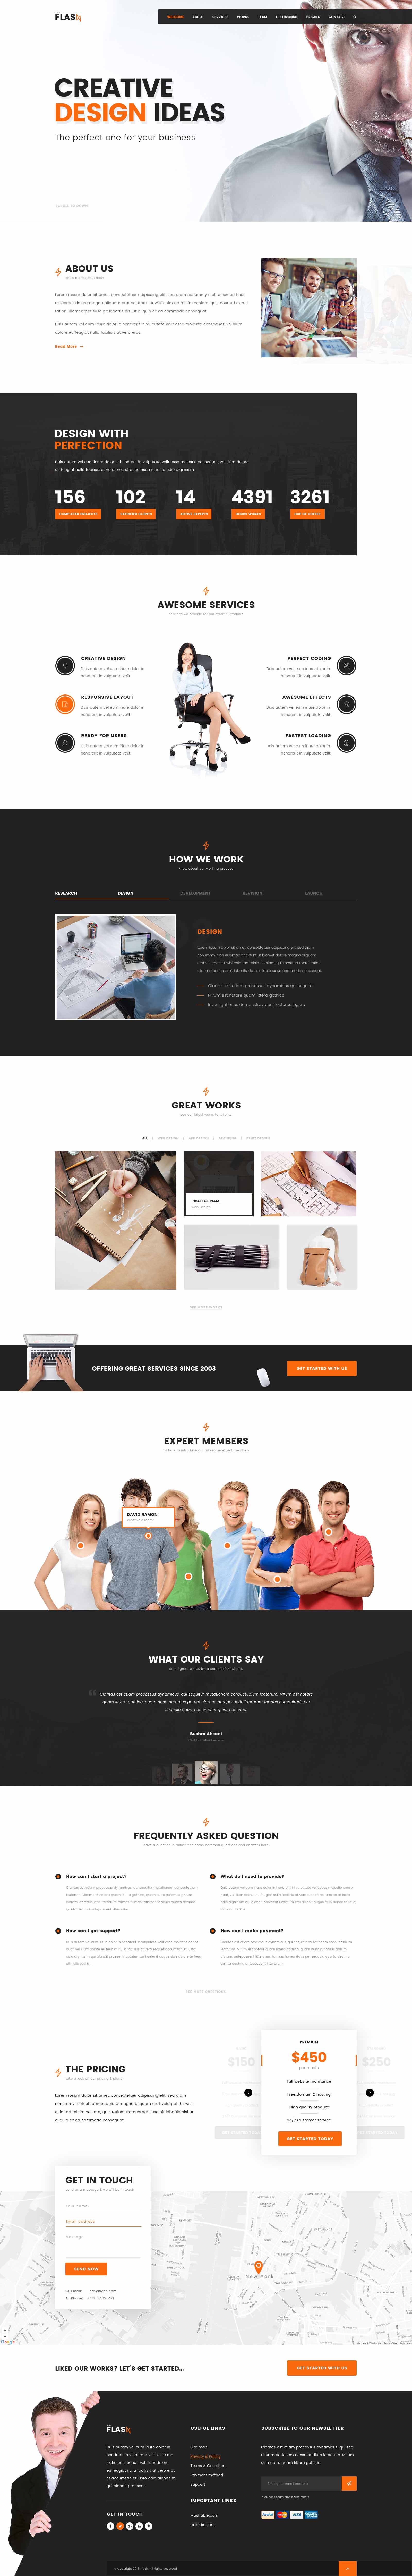 FLASH - One Page HTML Bootstrap Template for Agency, Startup, Business - 1